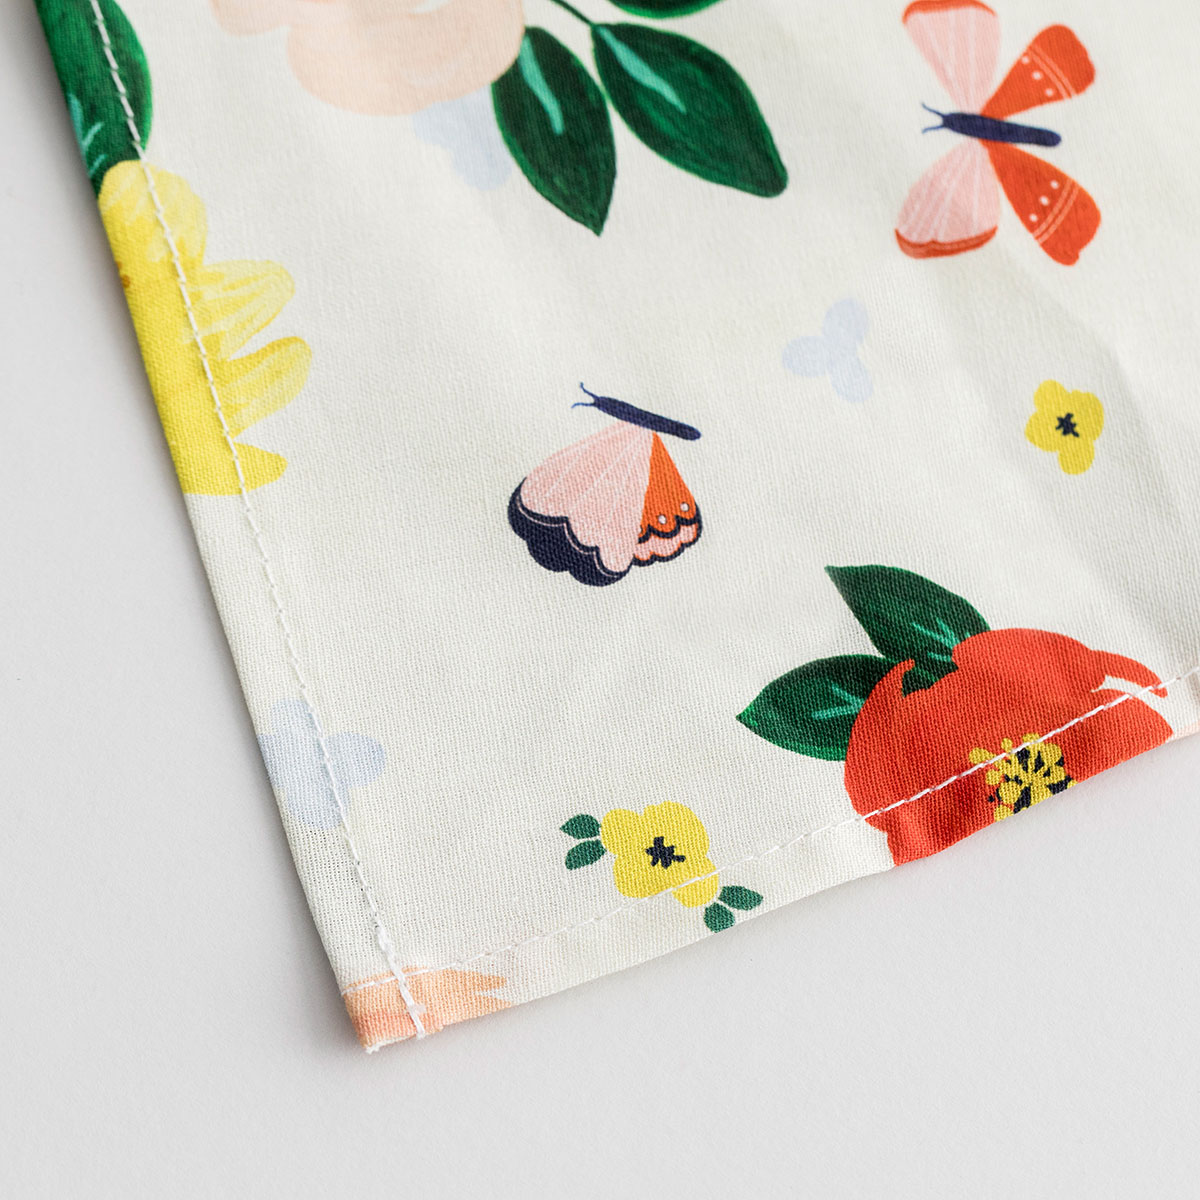 Bless a loved one with this DaySpring 'In Bloom' flare bib apron this Spring. With the premium quality and modern, beautiful design that you can always expect from Studio 71, this wonderful gift makes a statement on any occasion.